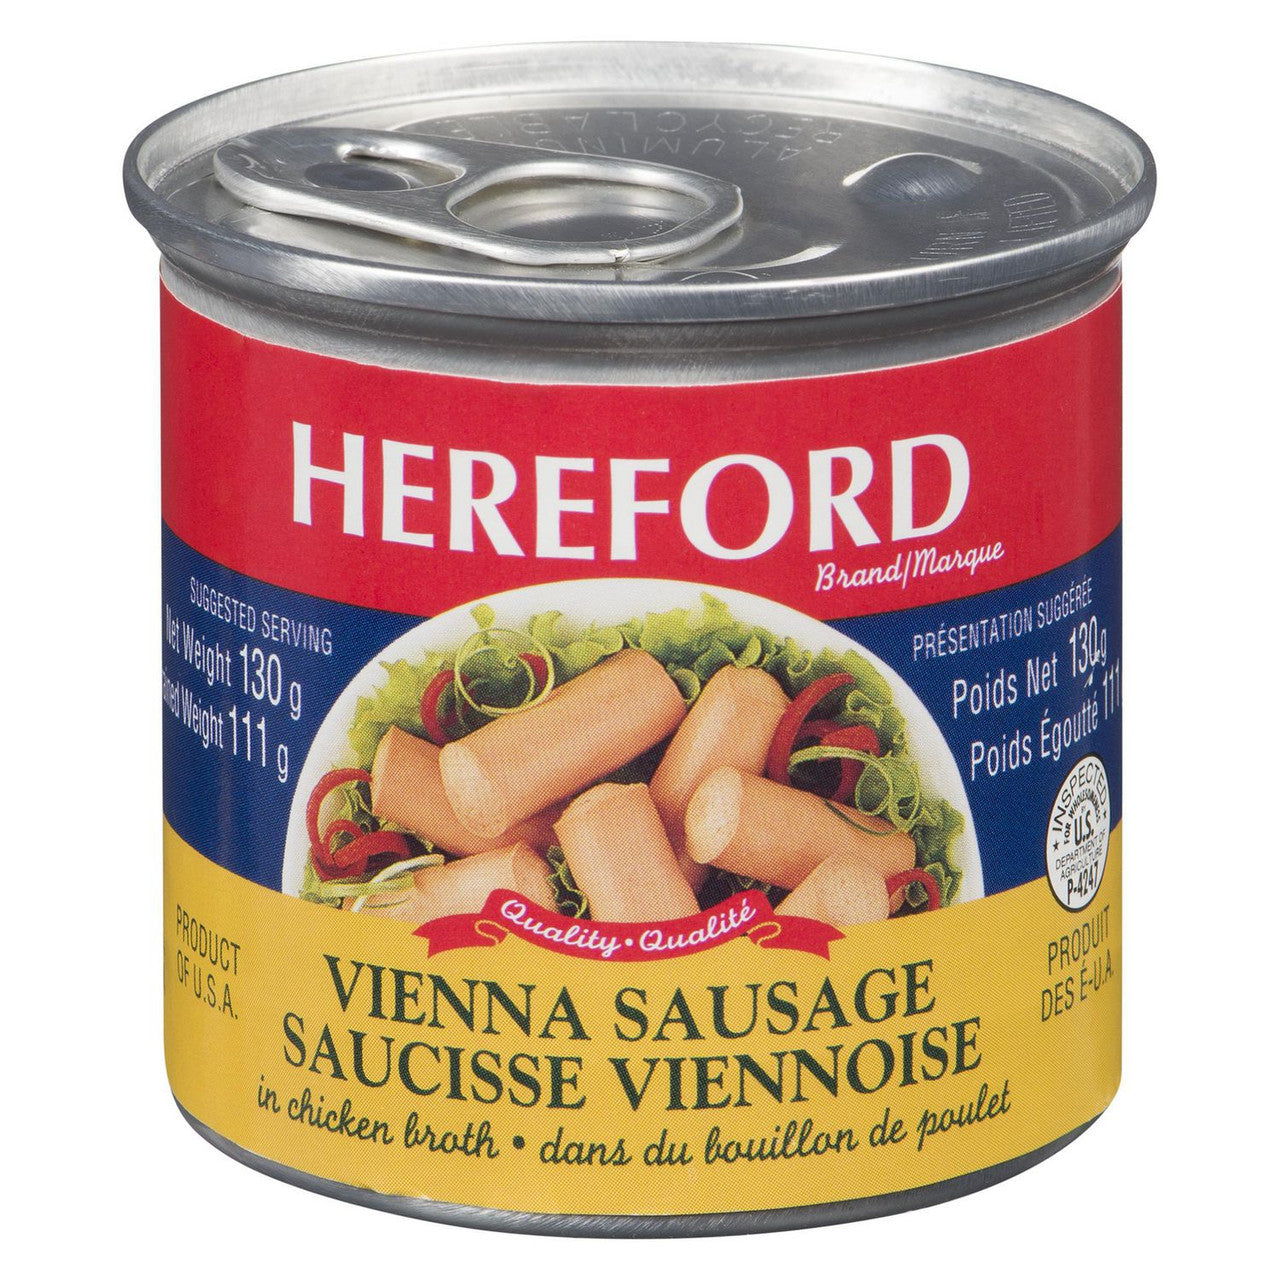 Hereford Vienna sausage in Chicken Broth, 130g/4.5 oz. Can (Imported from Canada)